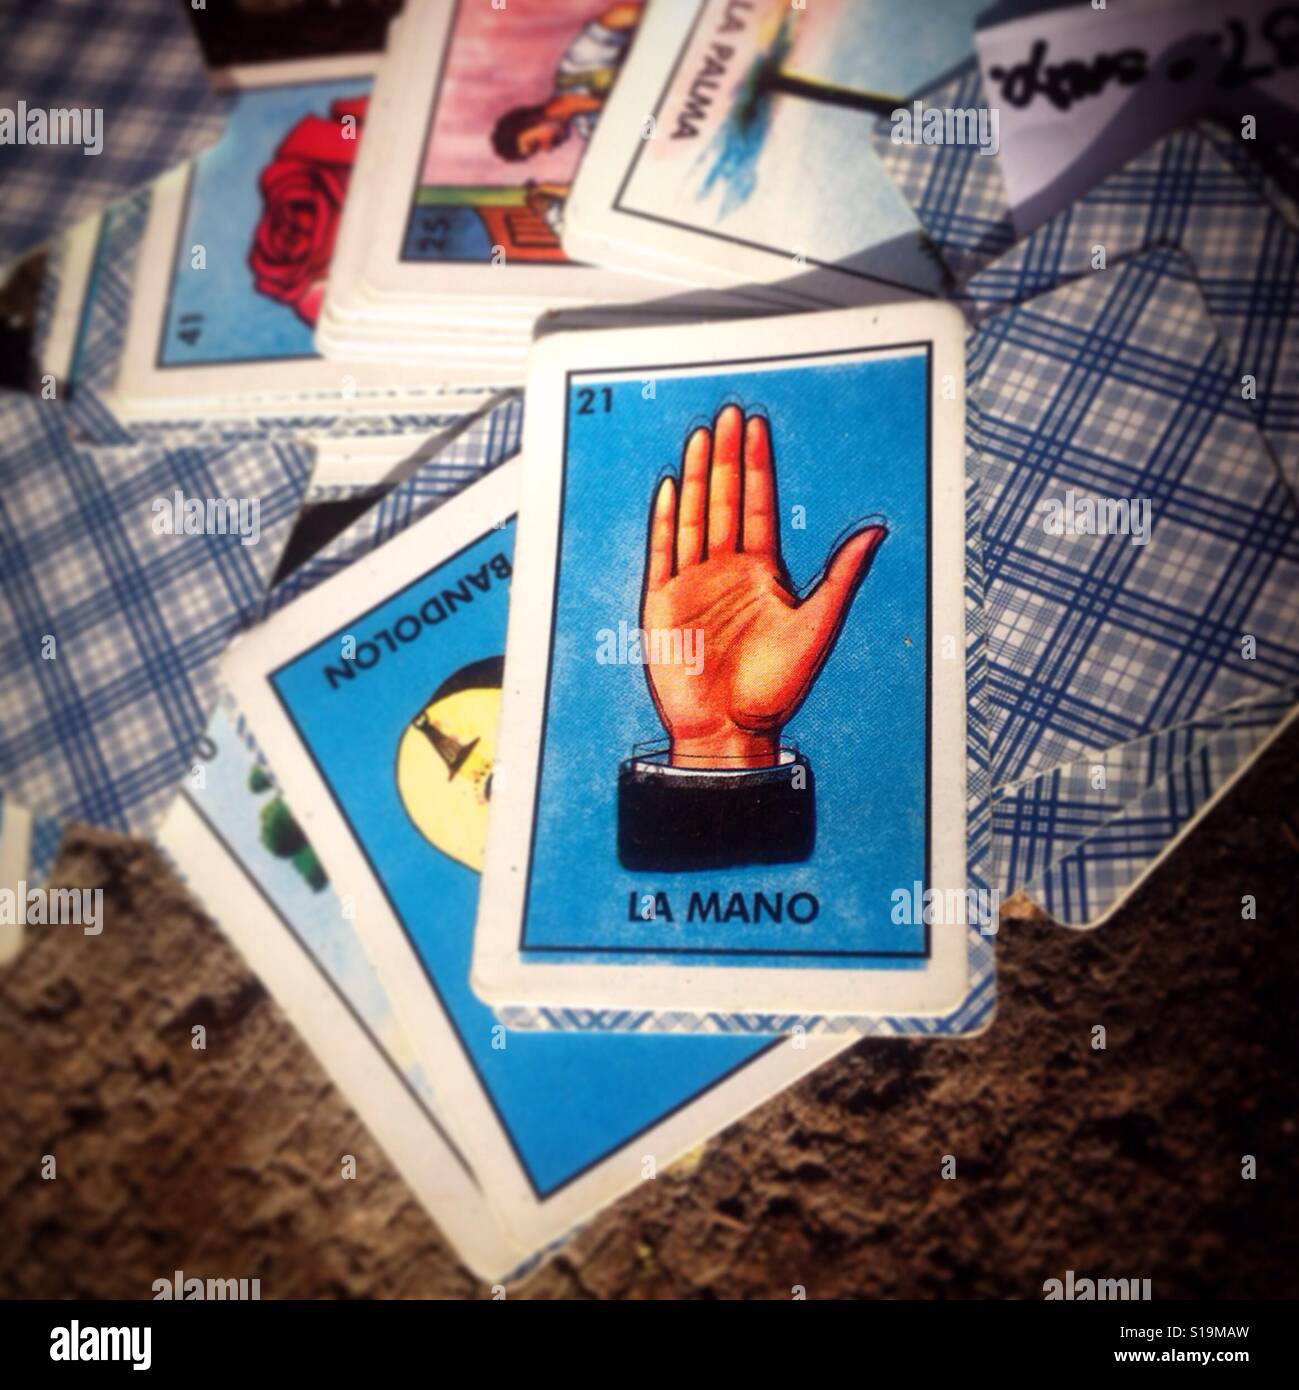 A tarot card with a hand and the number 21 thrown in the trash in Mexico City Stock Photo